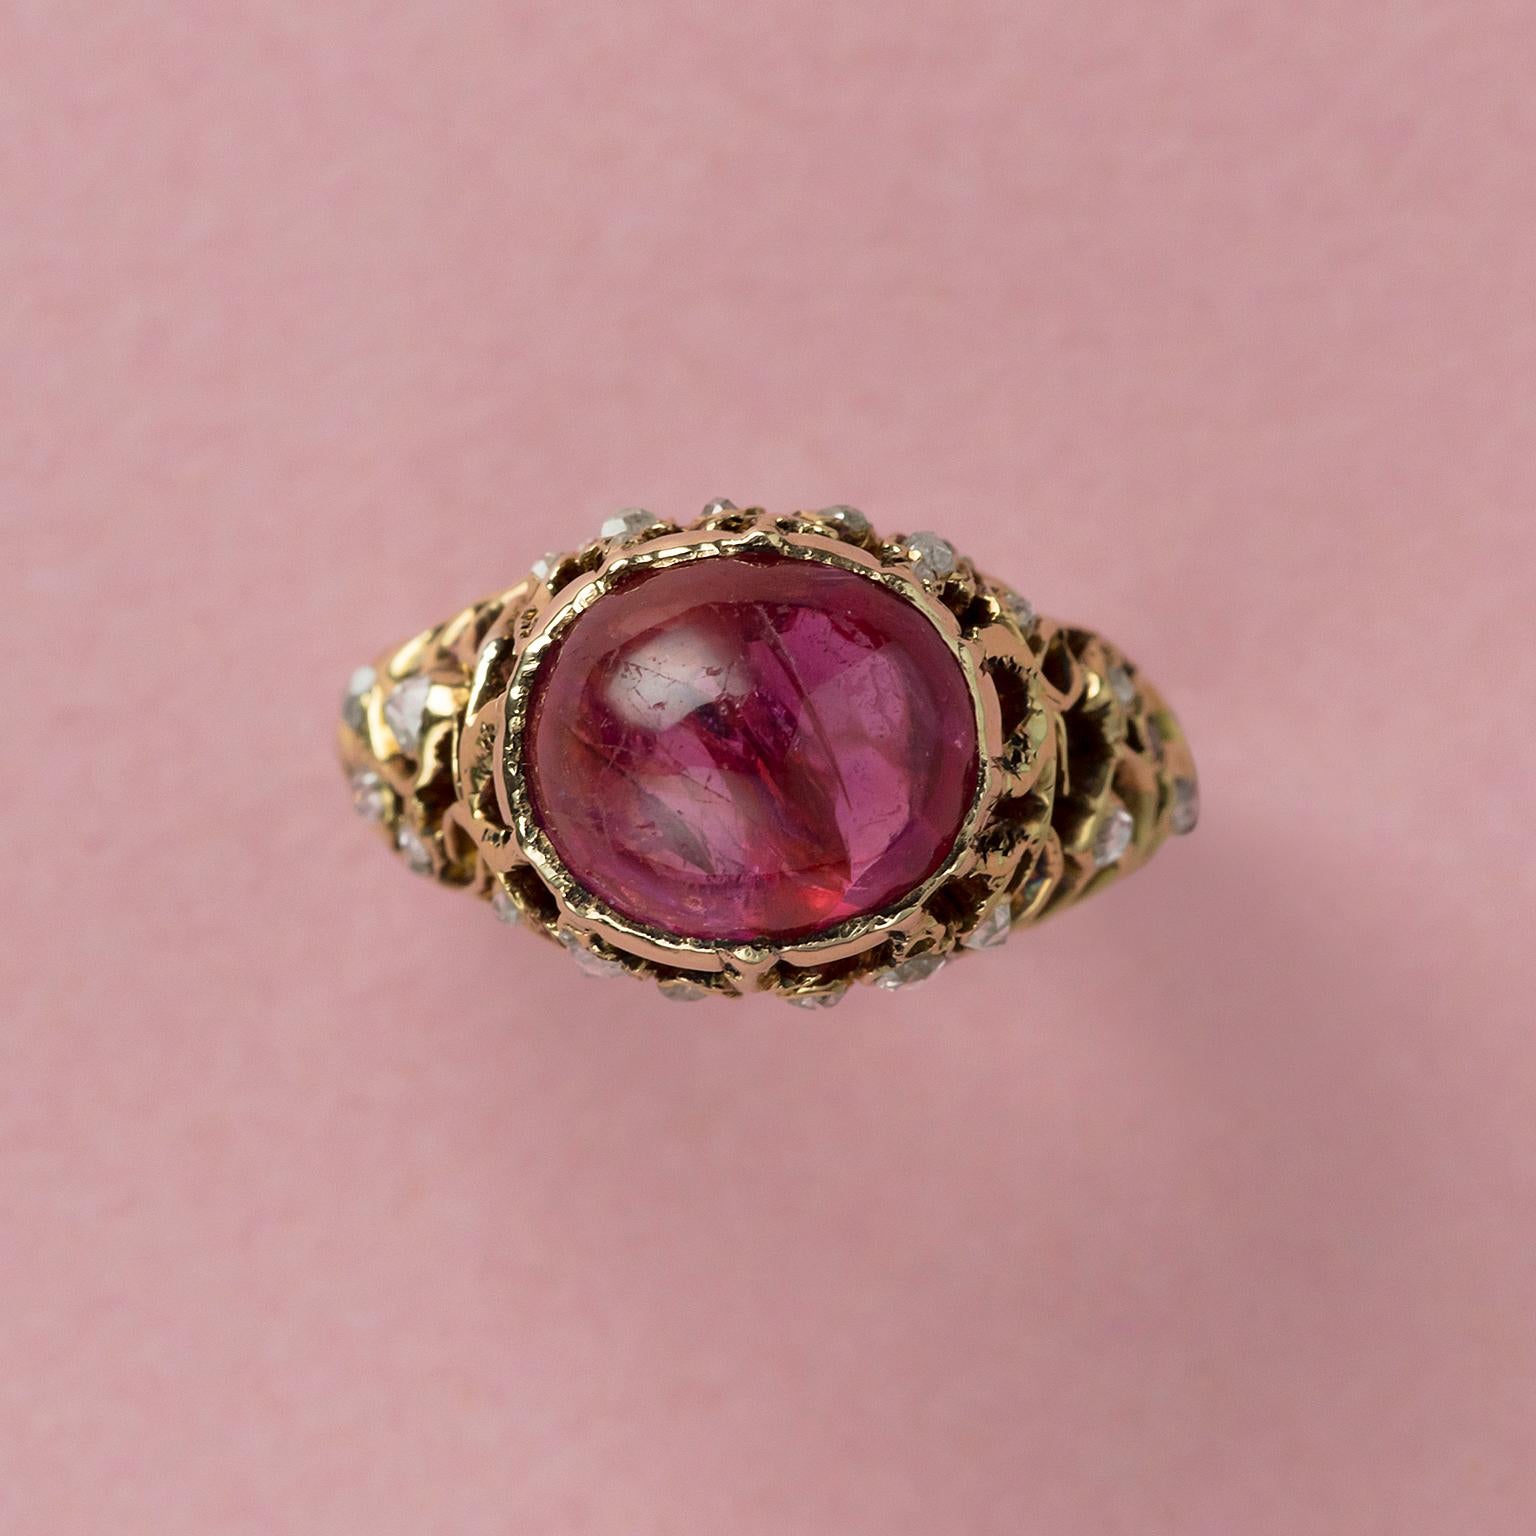 A pretty 18 carat gold ring set with a warm and pretty cabochon cut natural unenhanced red-pinkish Burma sapphire (app. 4.7 carat with certificate) the shank is completely open worked with scrolls that are decorated with rose cut diamonds.

weight: